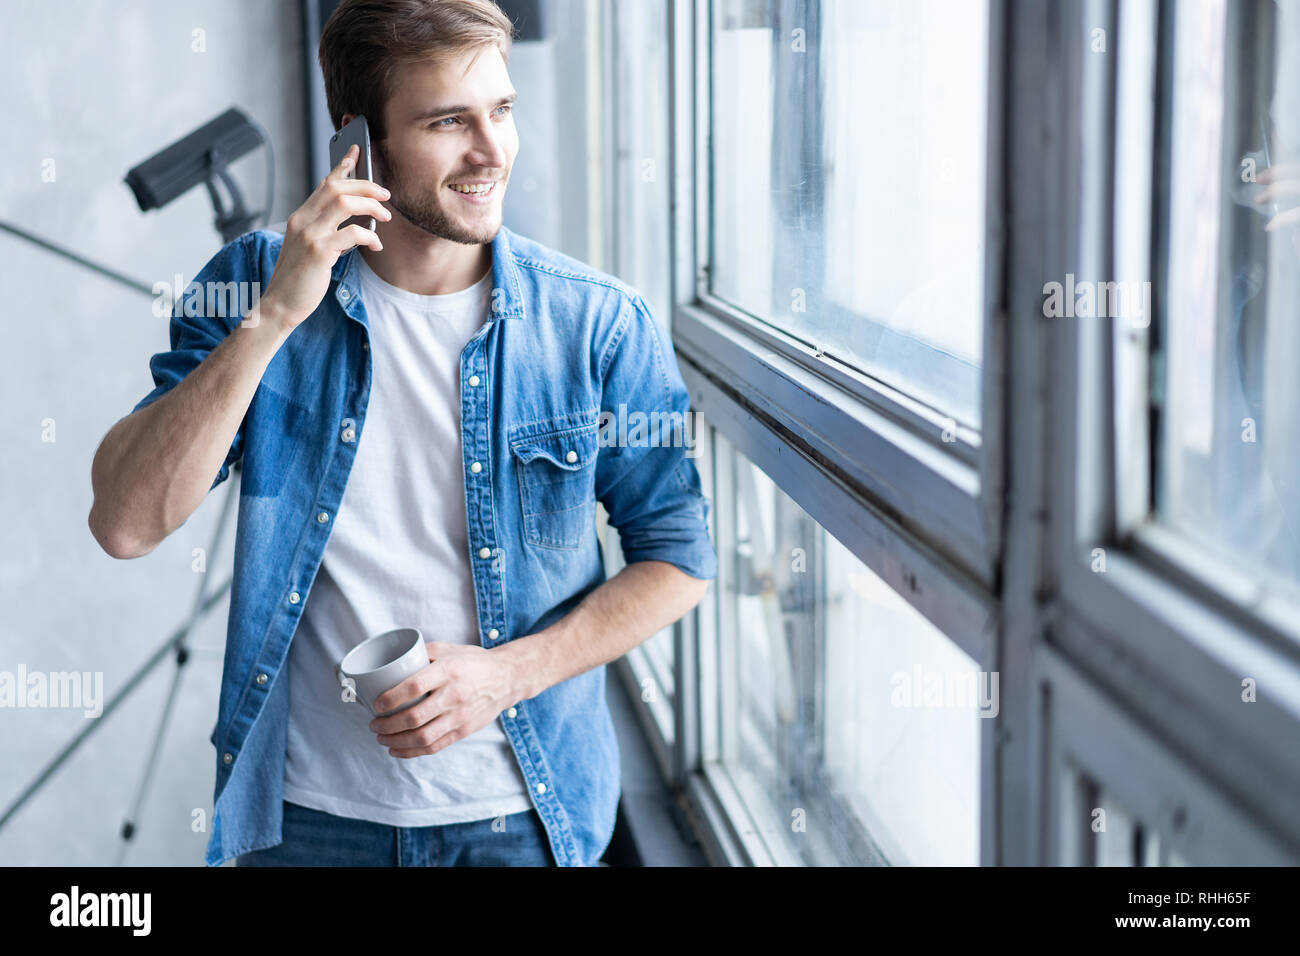 Smiling young man talking on mobile phone, looking at the window at home. Stock Photo